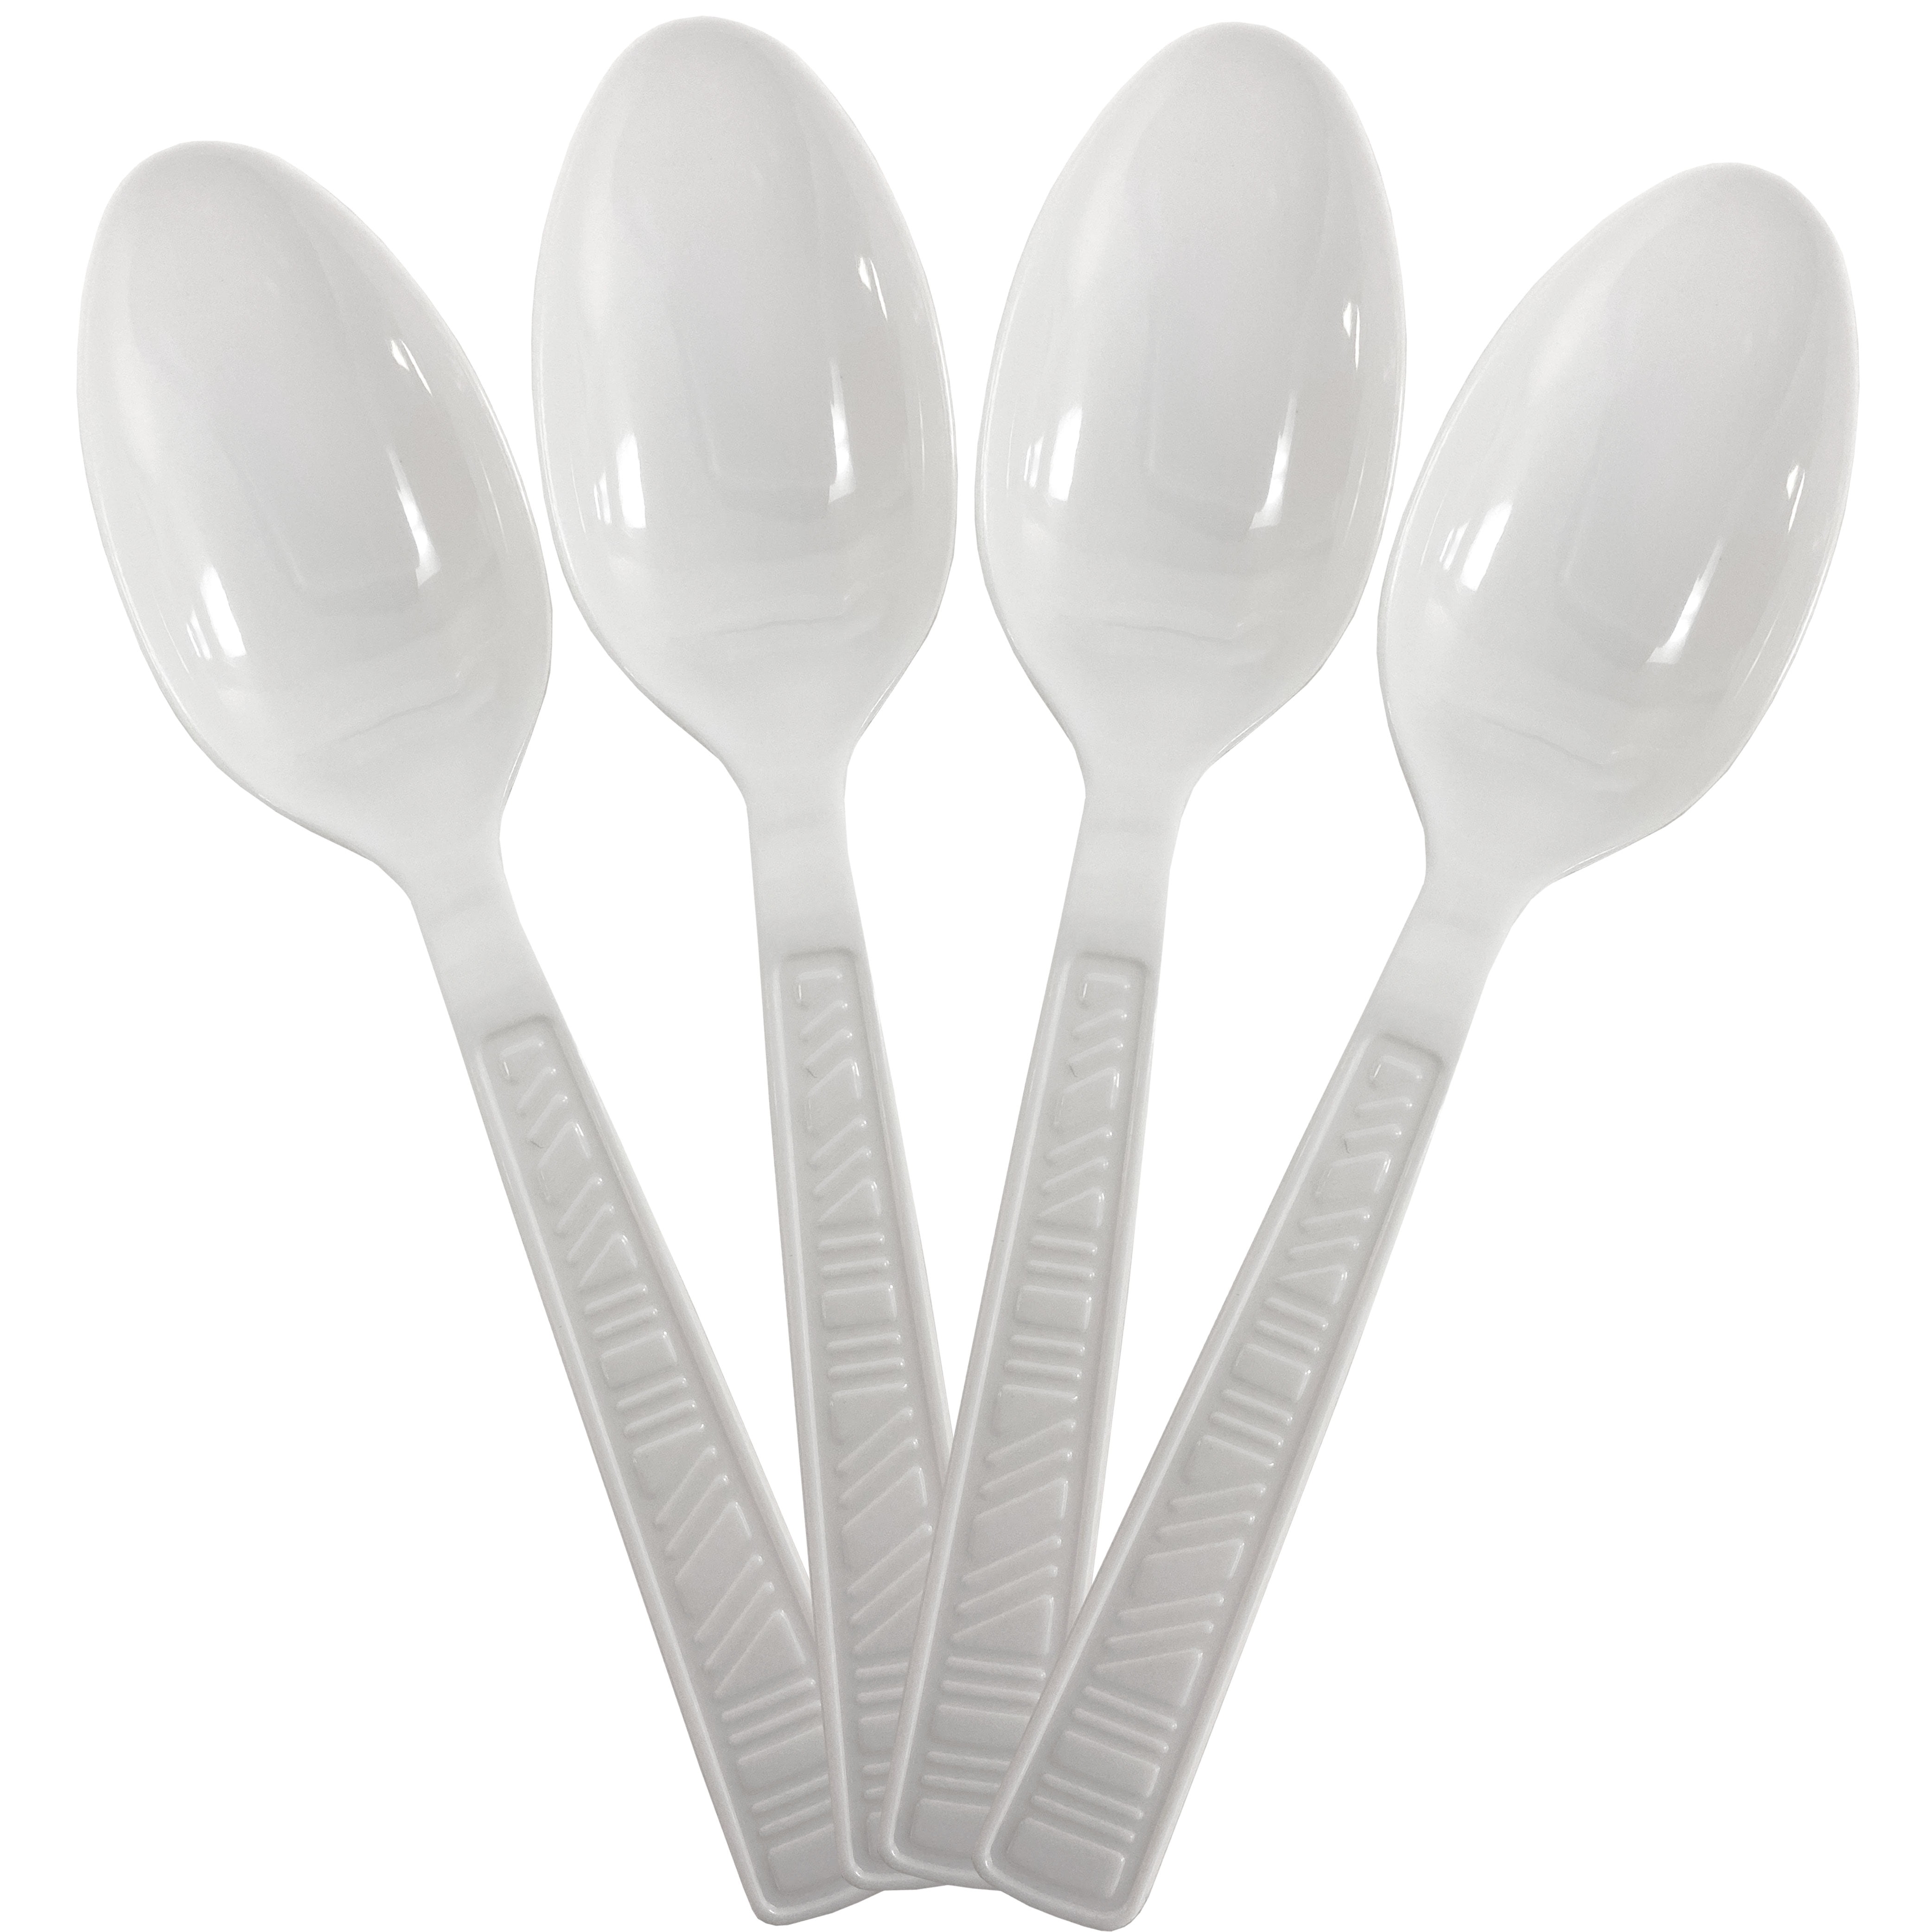 PACK OF 100 WHITE PLASTIC DISPOSABLE TEA SPOONS TEASPOONS PARTY CATERING CAFE 